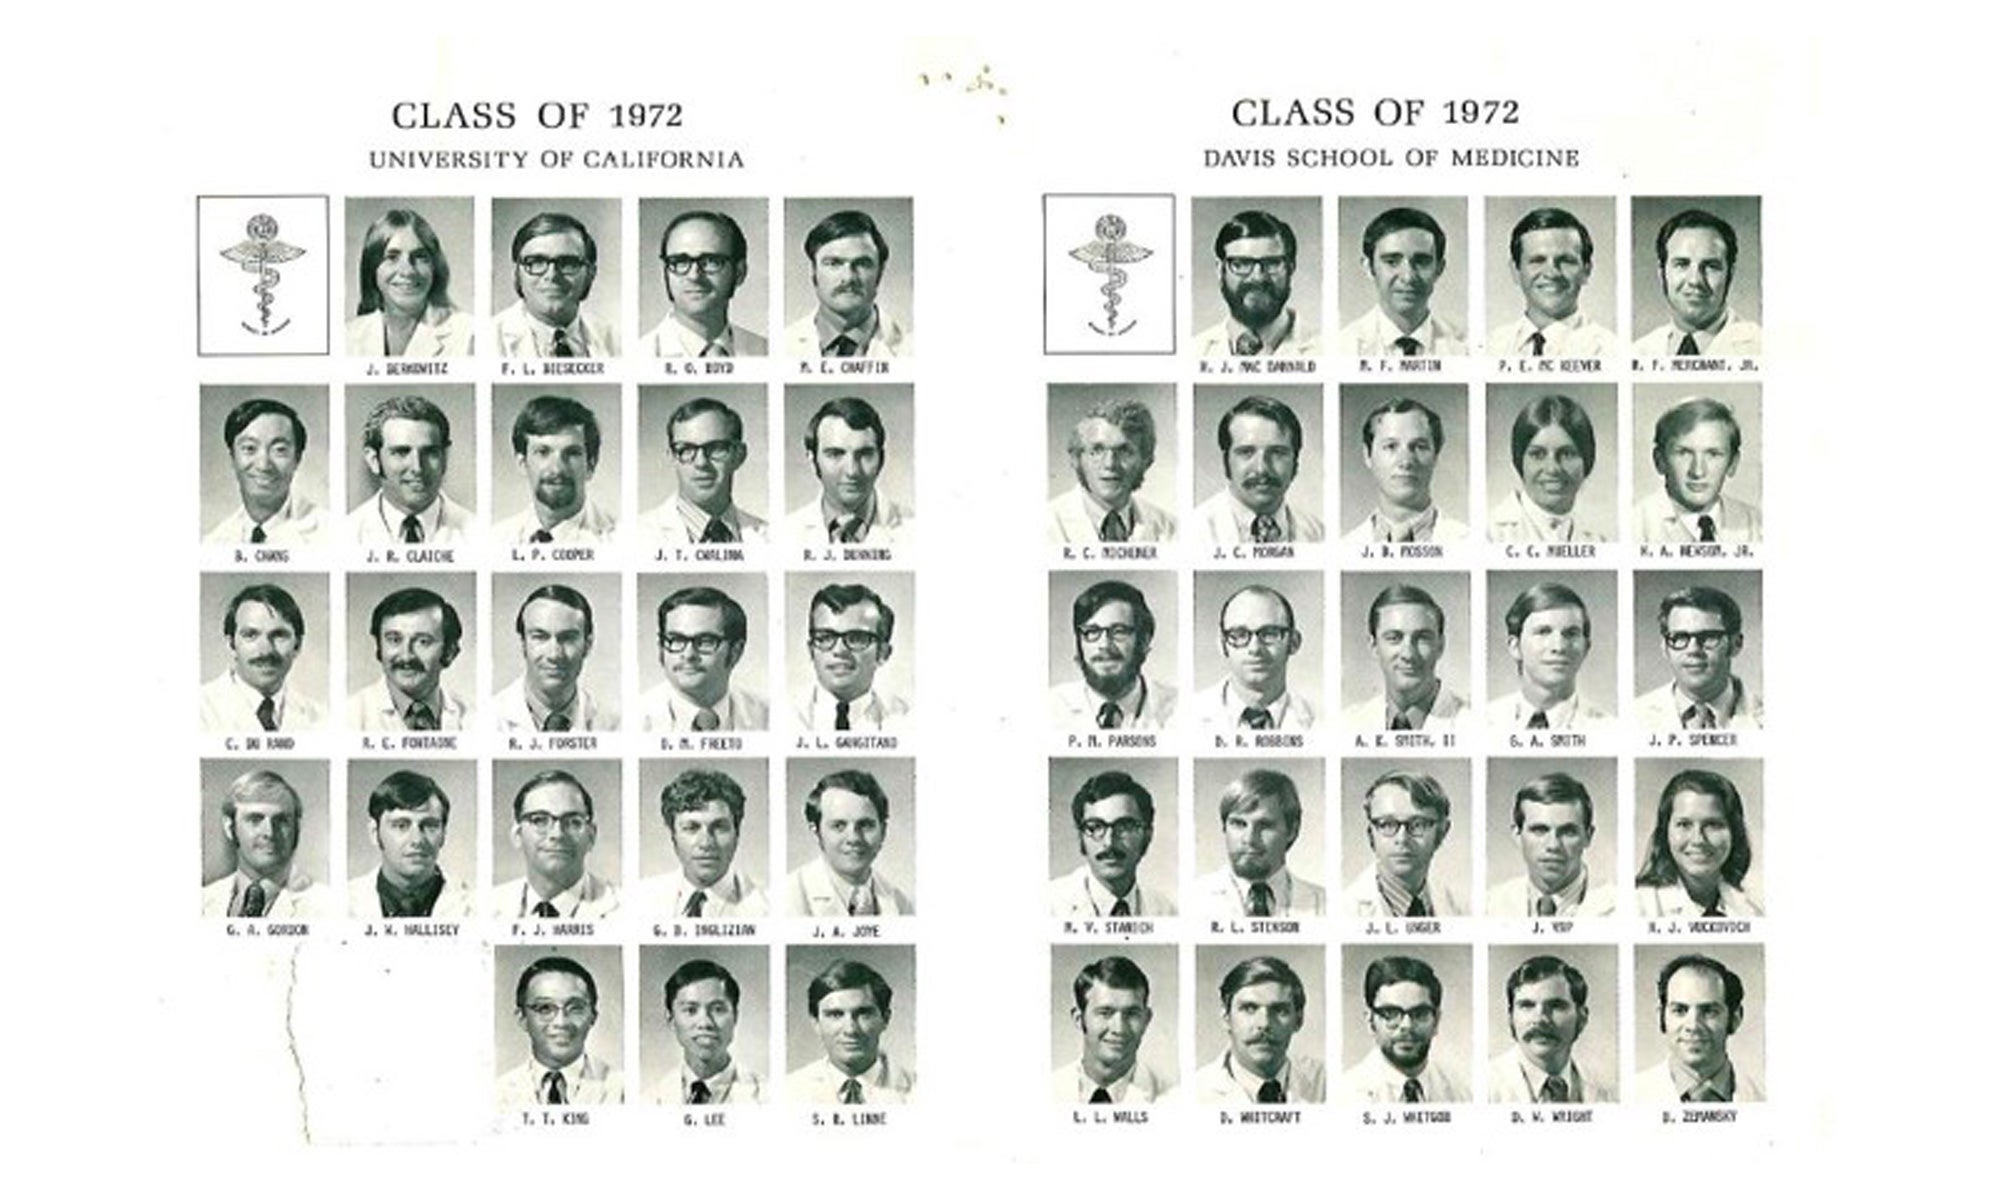 Yearbook photos of medical students from 1972